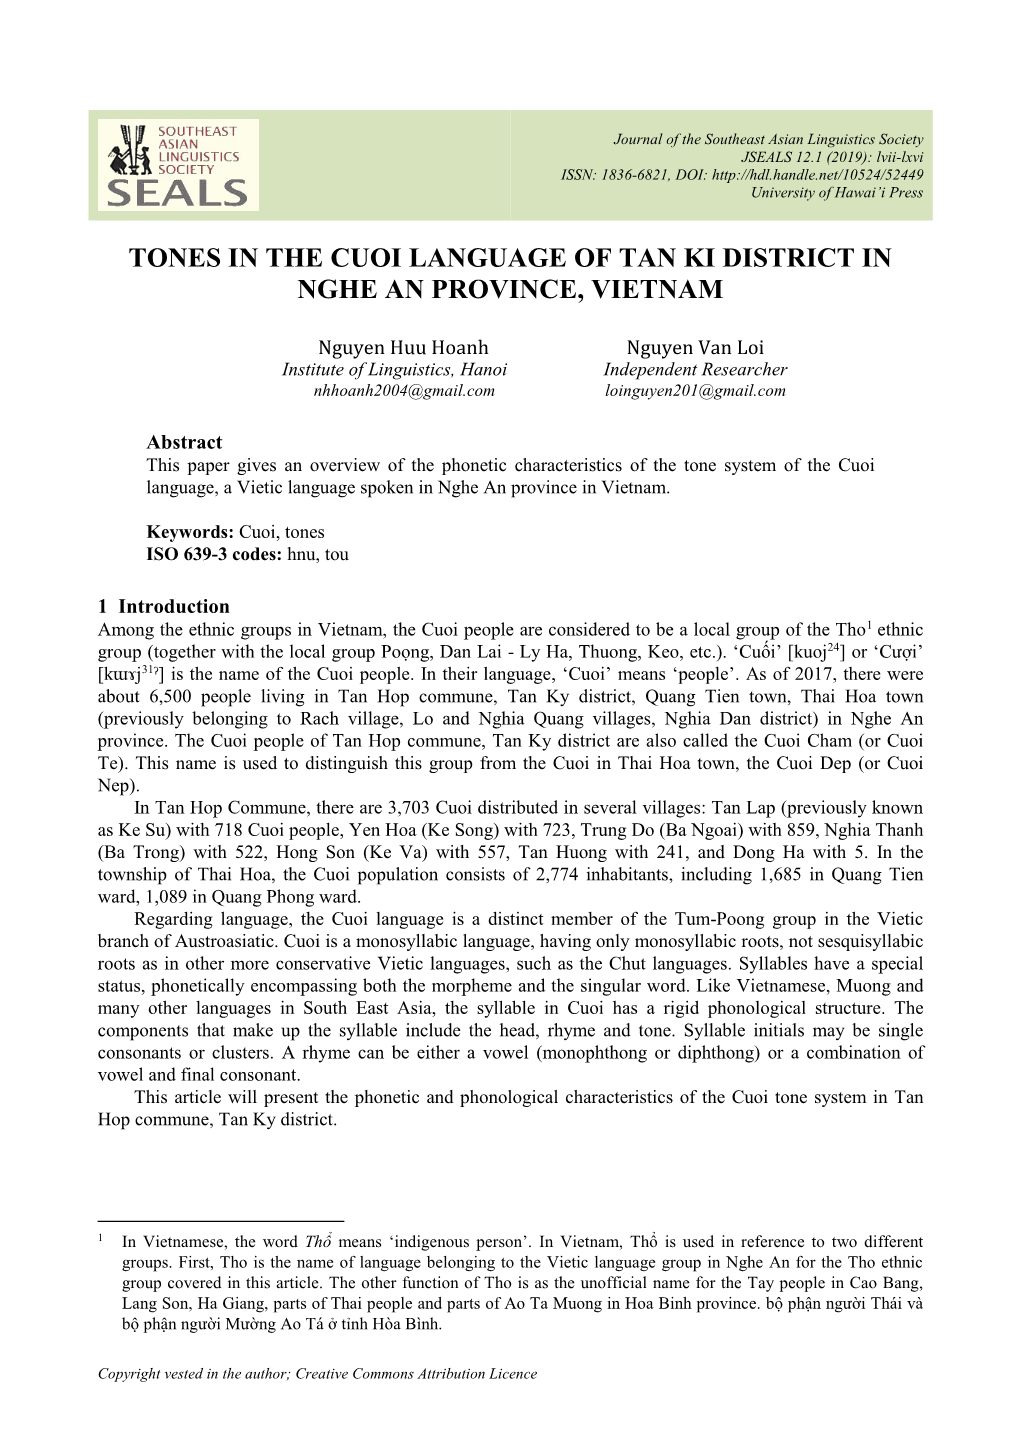 Tones in the Cuoi Language of Tan Ki District in Nghe an Province, Vietnam